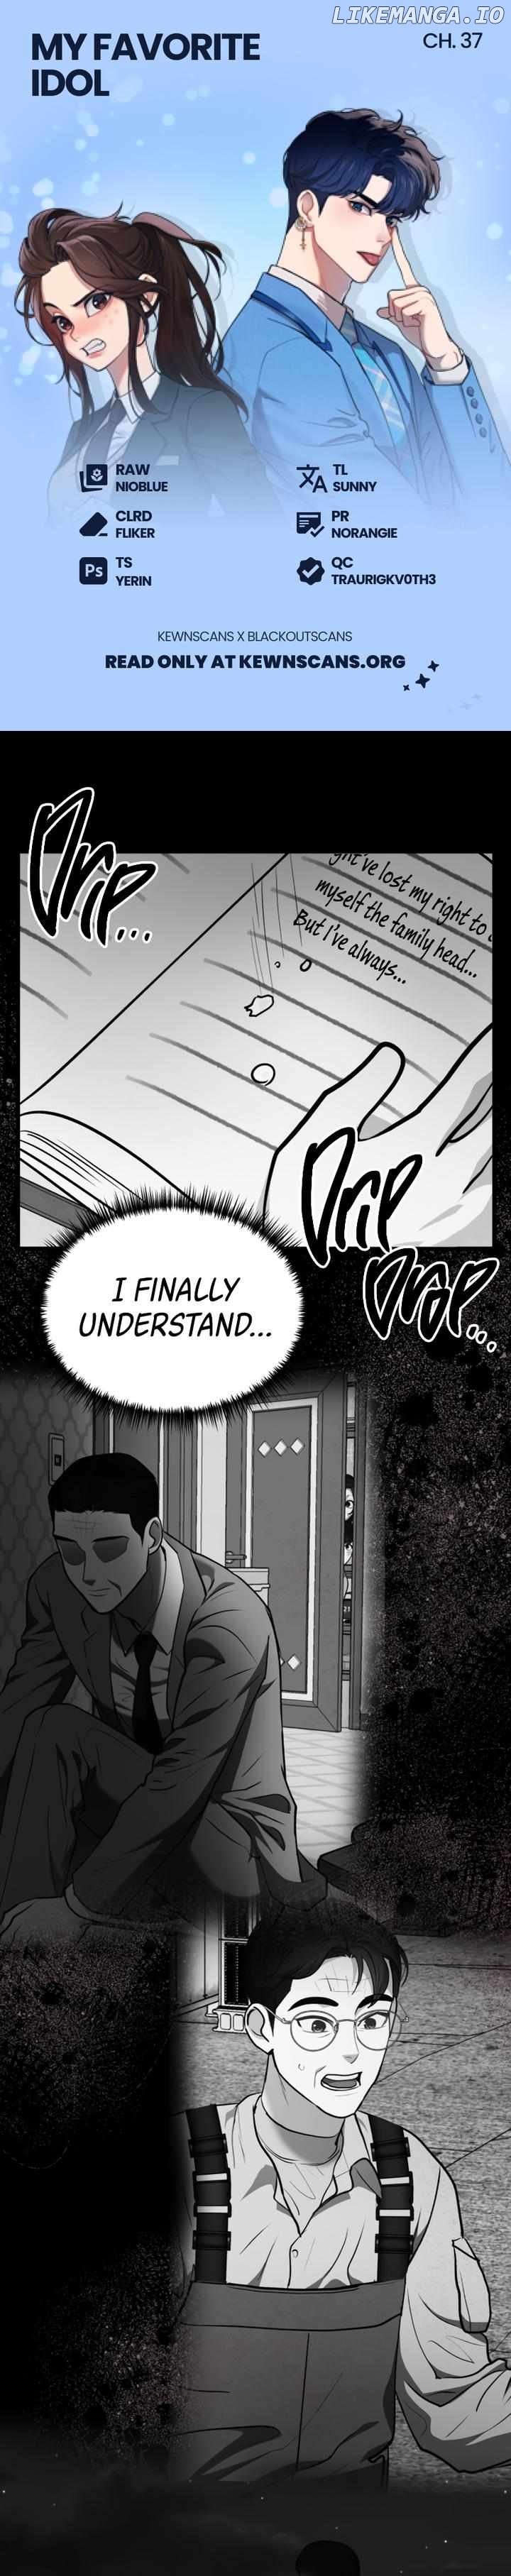 My Favorite Idol Chapter 37 - page 1